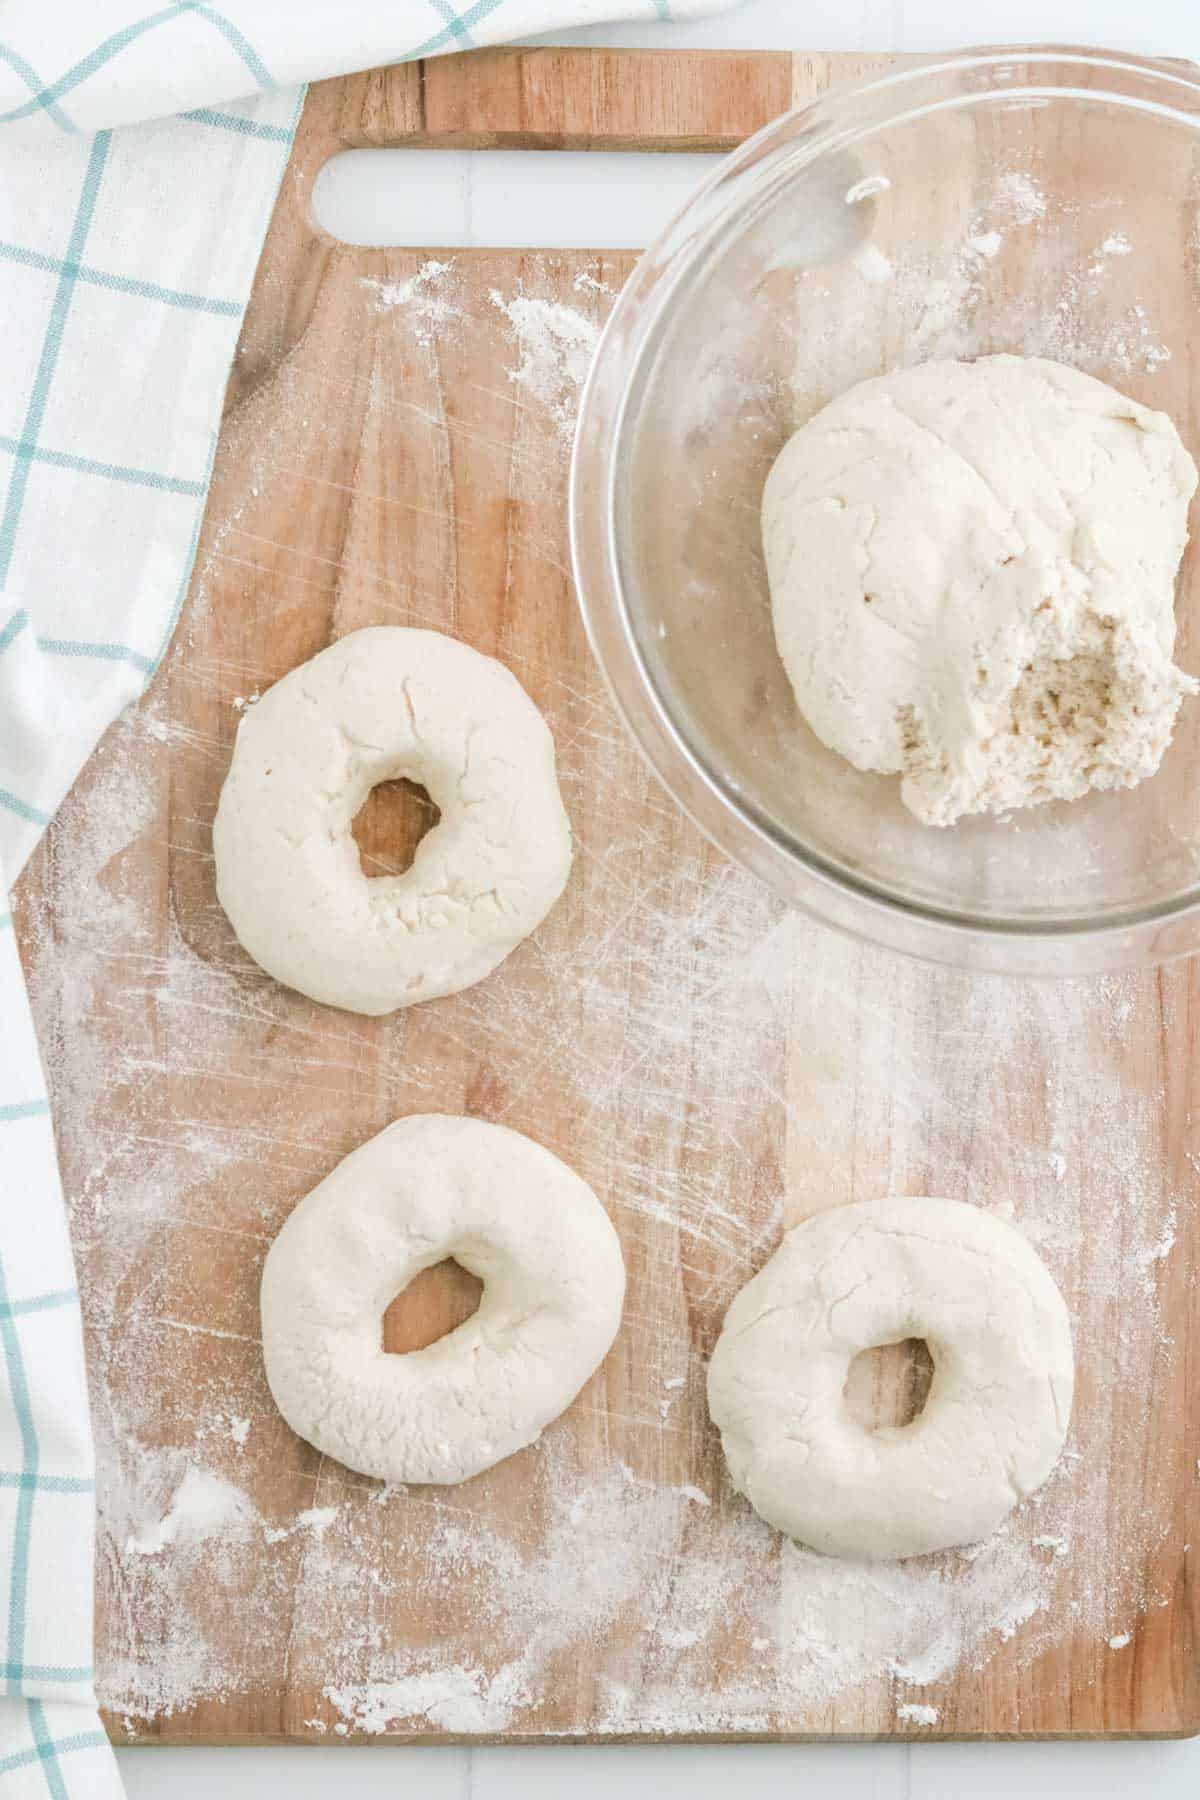 Dough being rolled into bagel shapes on a floured surface.